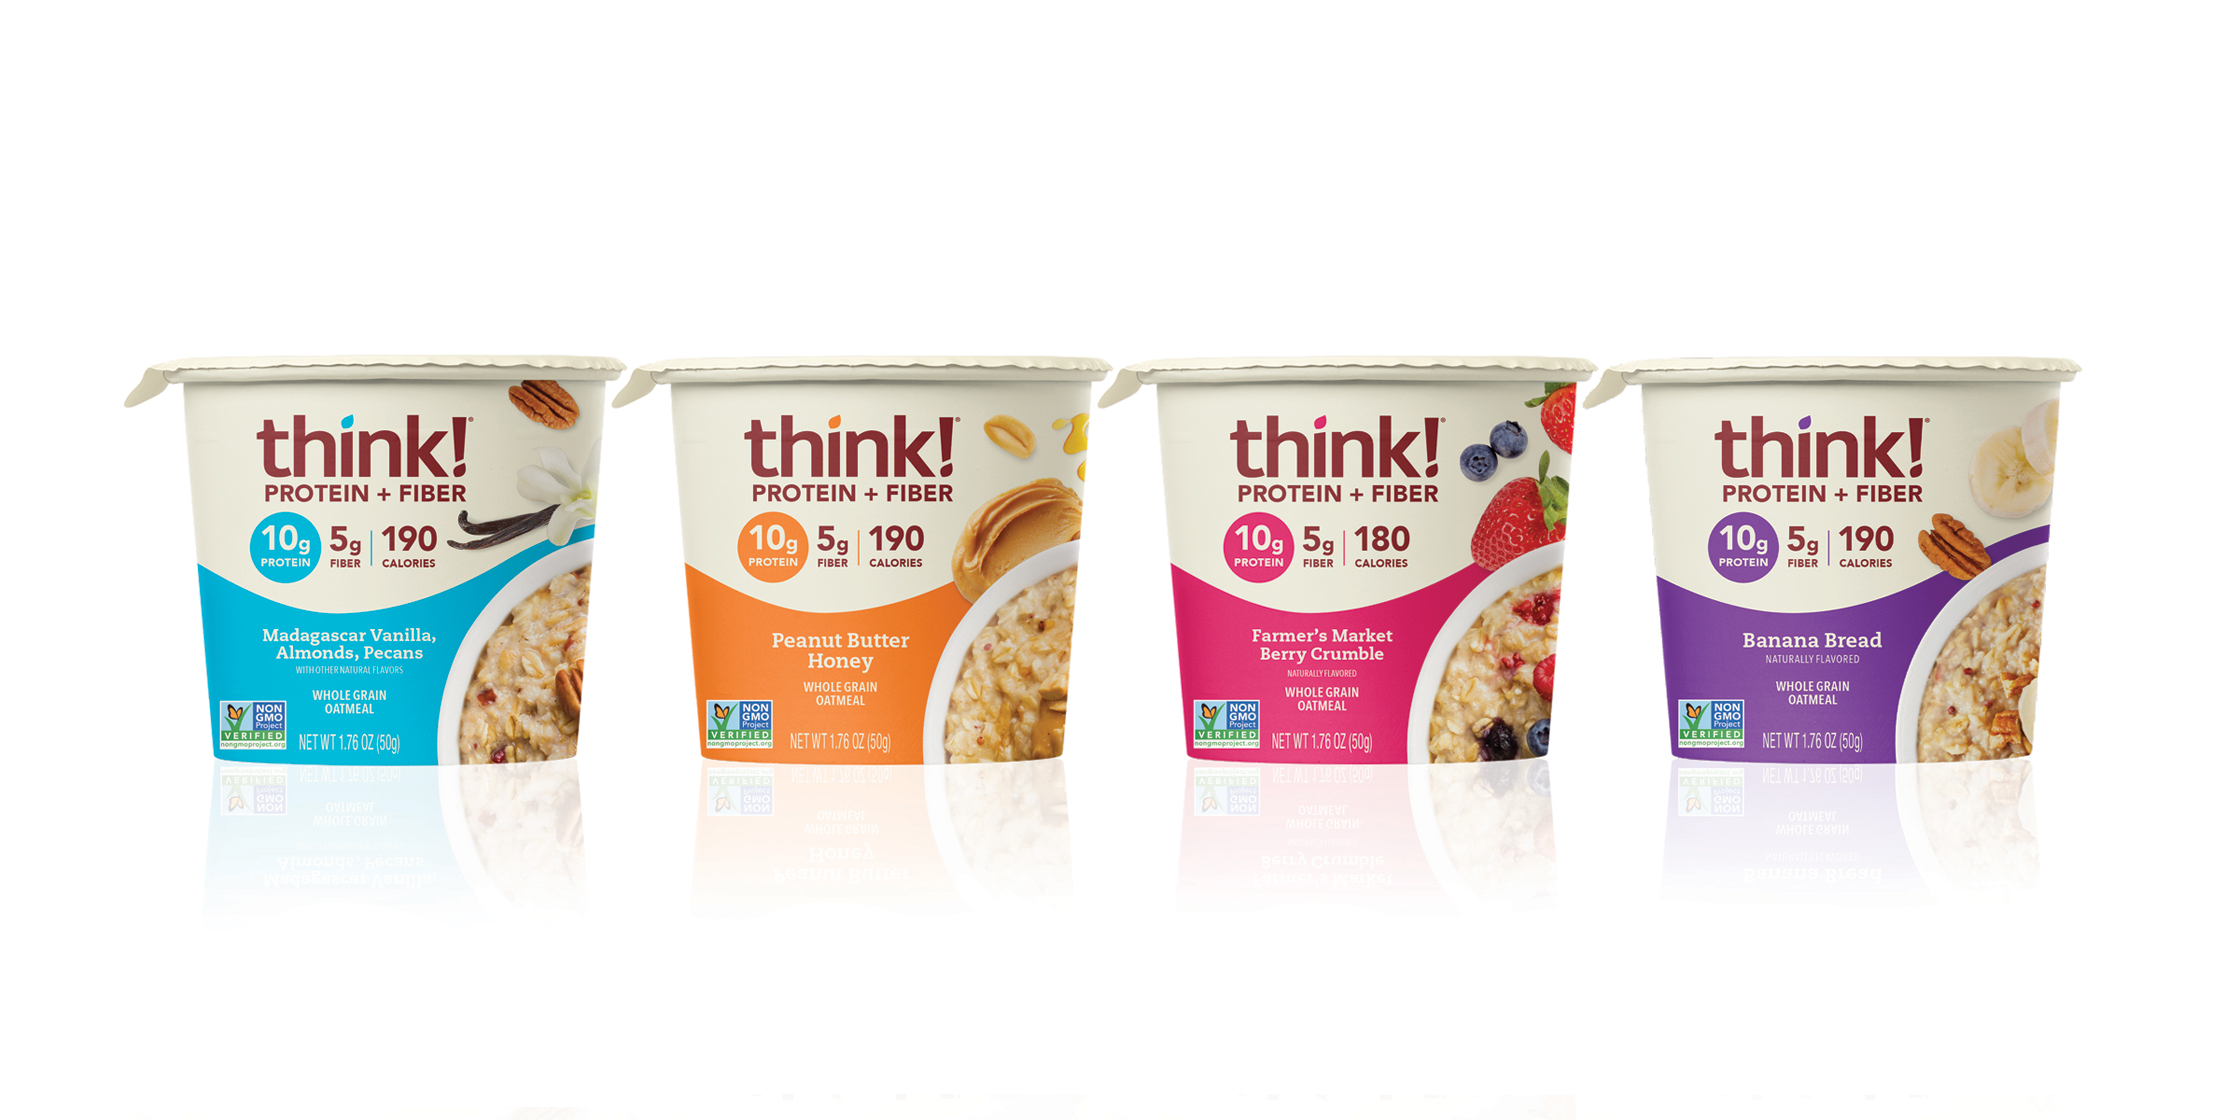 The Creative Pack Redesign of Think! Fiber and Protein Oatmeal